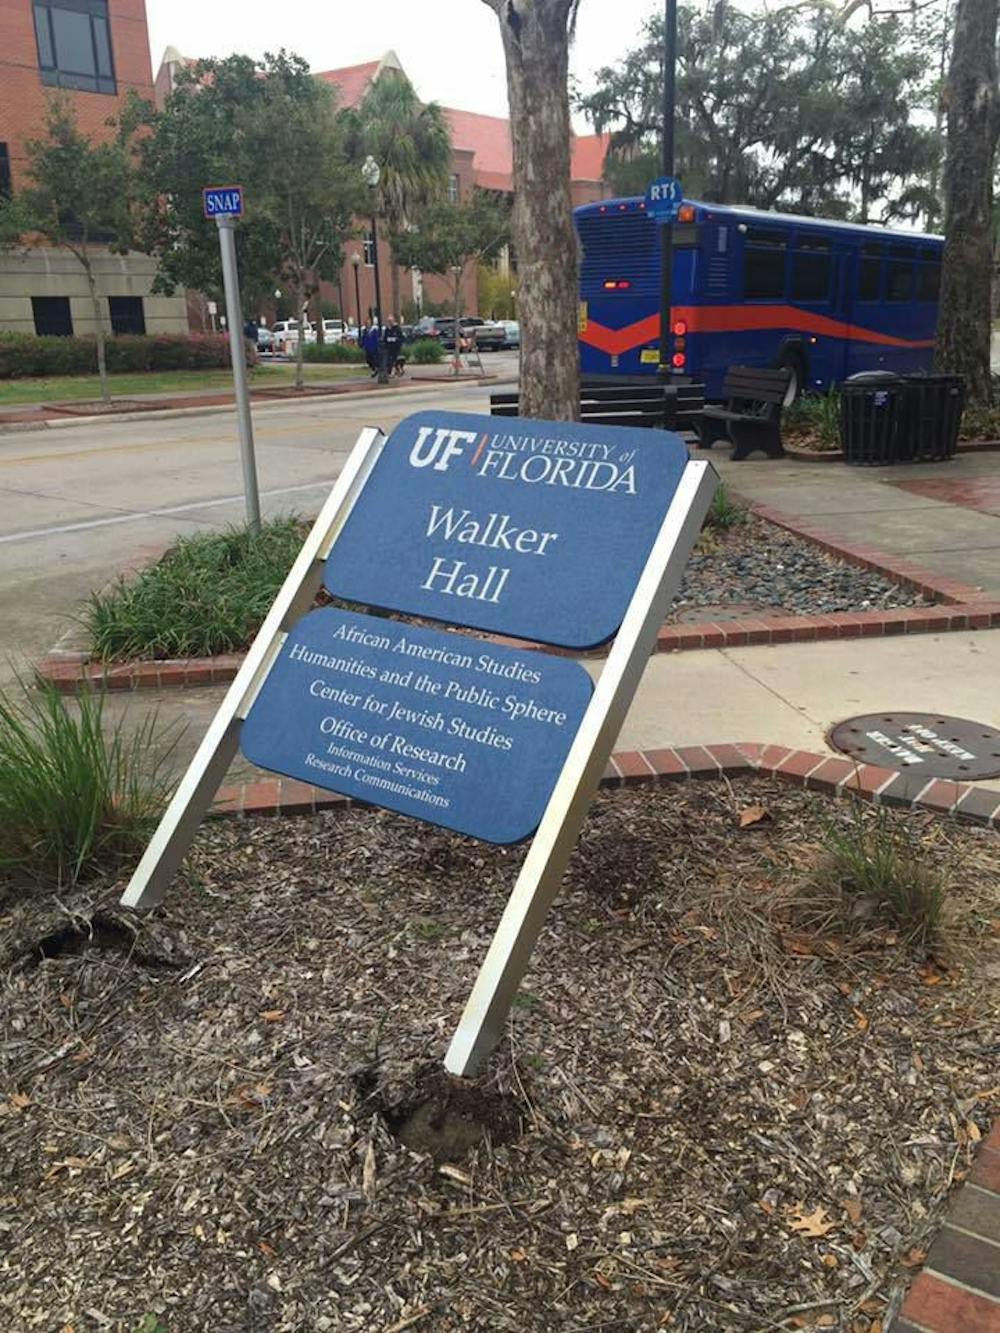 <p>The sign for Walker Hall, which houses the African American Studies department and the Center for Jewish Studies, was found uprooted Wednesday.</p>
<p><span>&nbsp;</span></p>